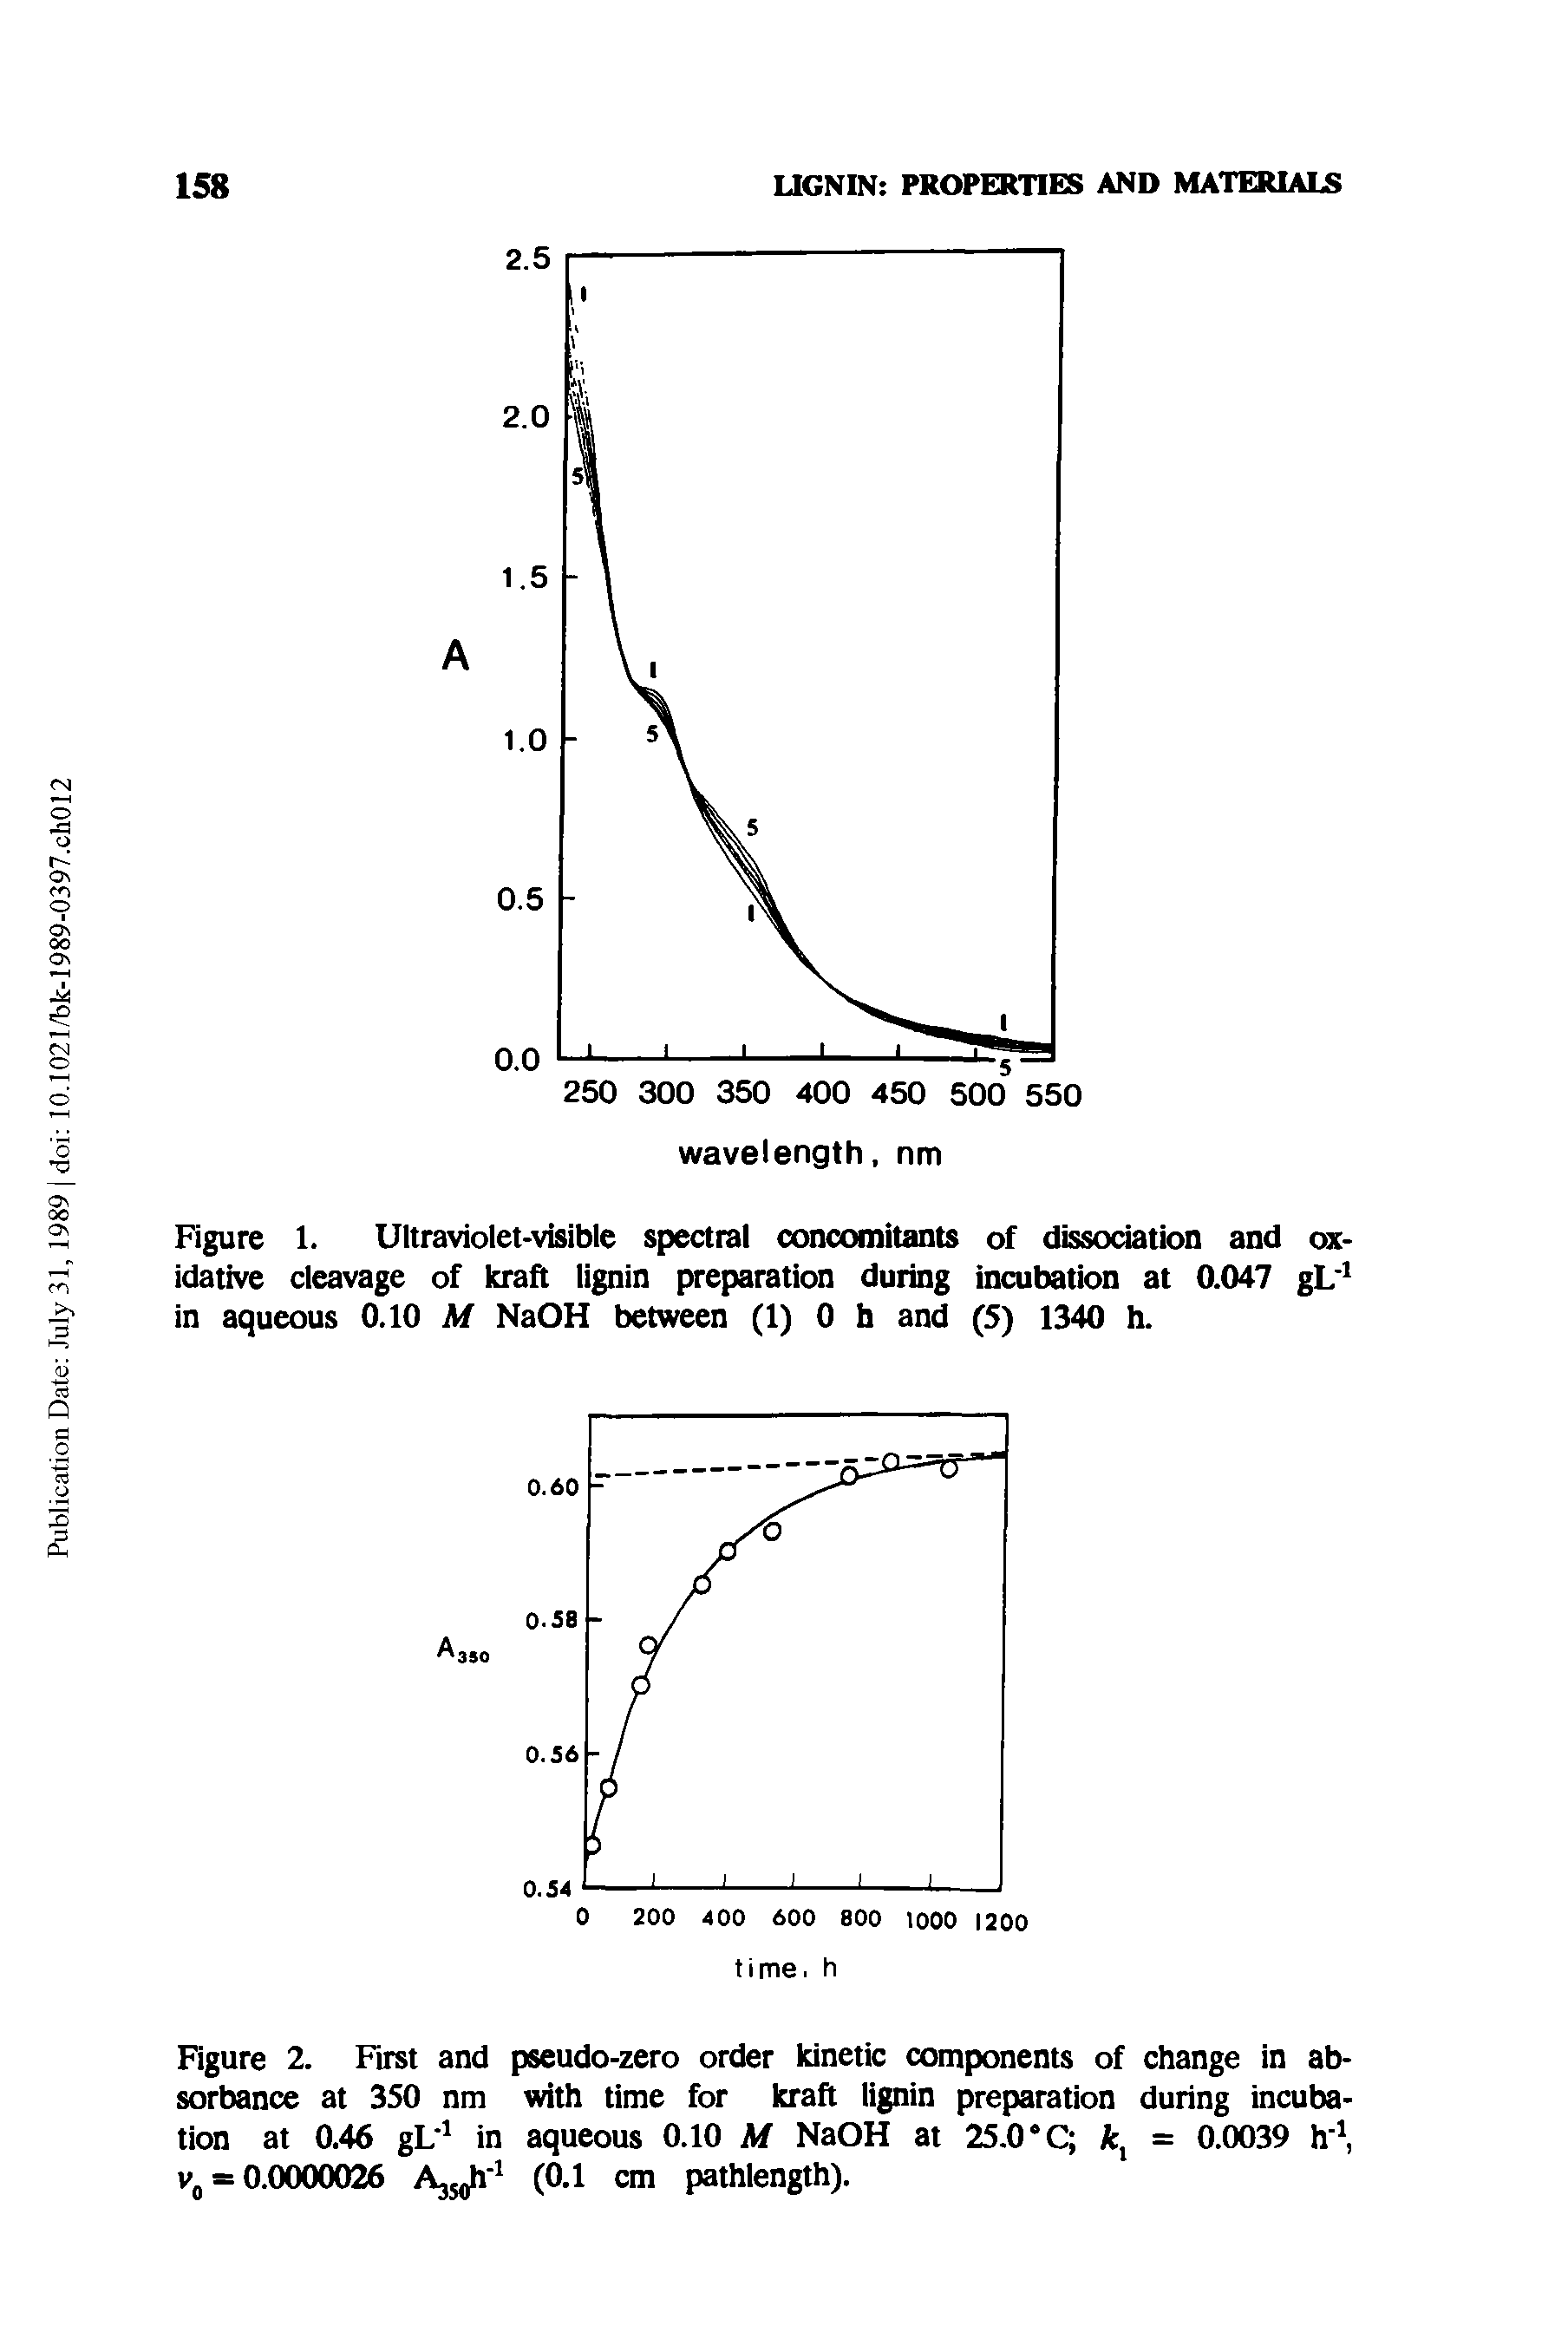 Figure 2. First and pseudo-zero order kinetic components of change in absorbance at 350 nm with time for kraft lignin preparation during incubation at 0.46 gL 1 in aqueous 0.10 M NaOH at 25.0 °C kx = 0.0039 h 1, v0 = 0.0000026 A35 h 1 (0.1 cm pathlength).